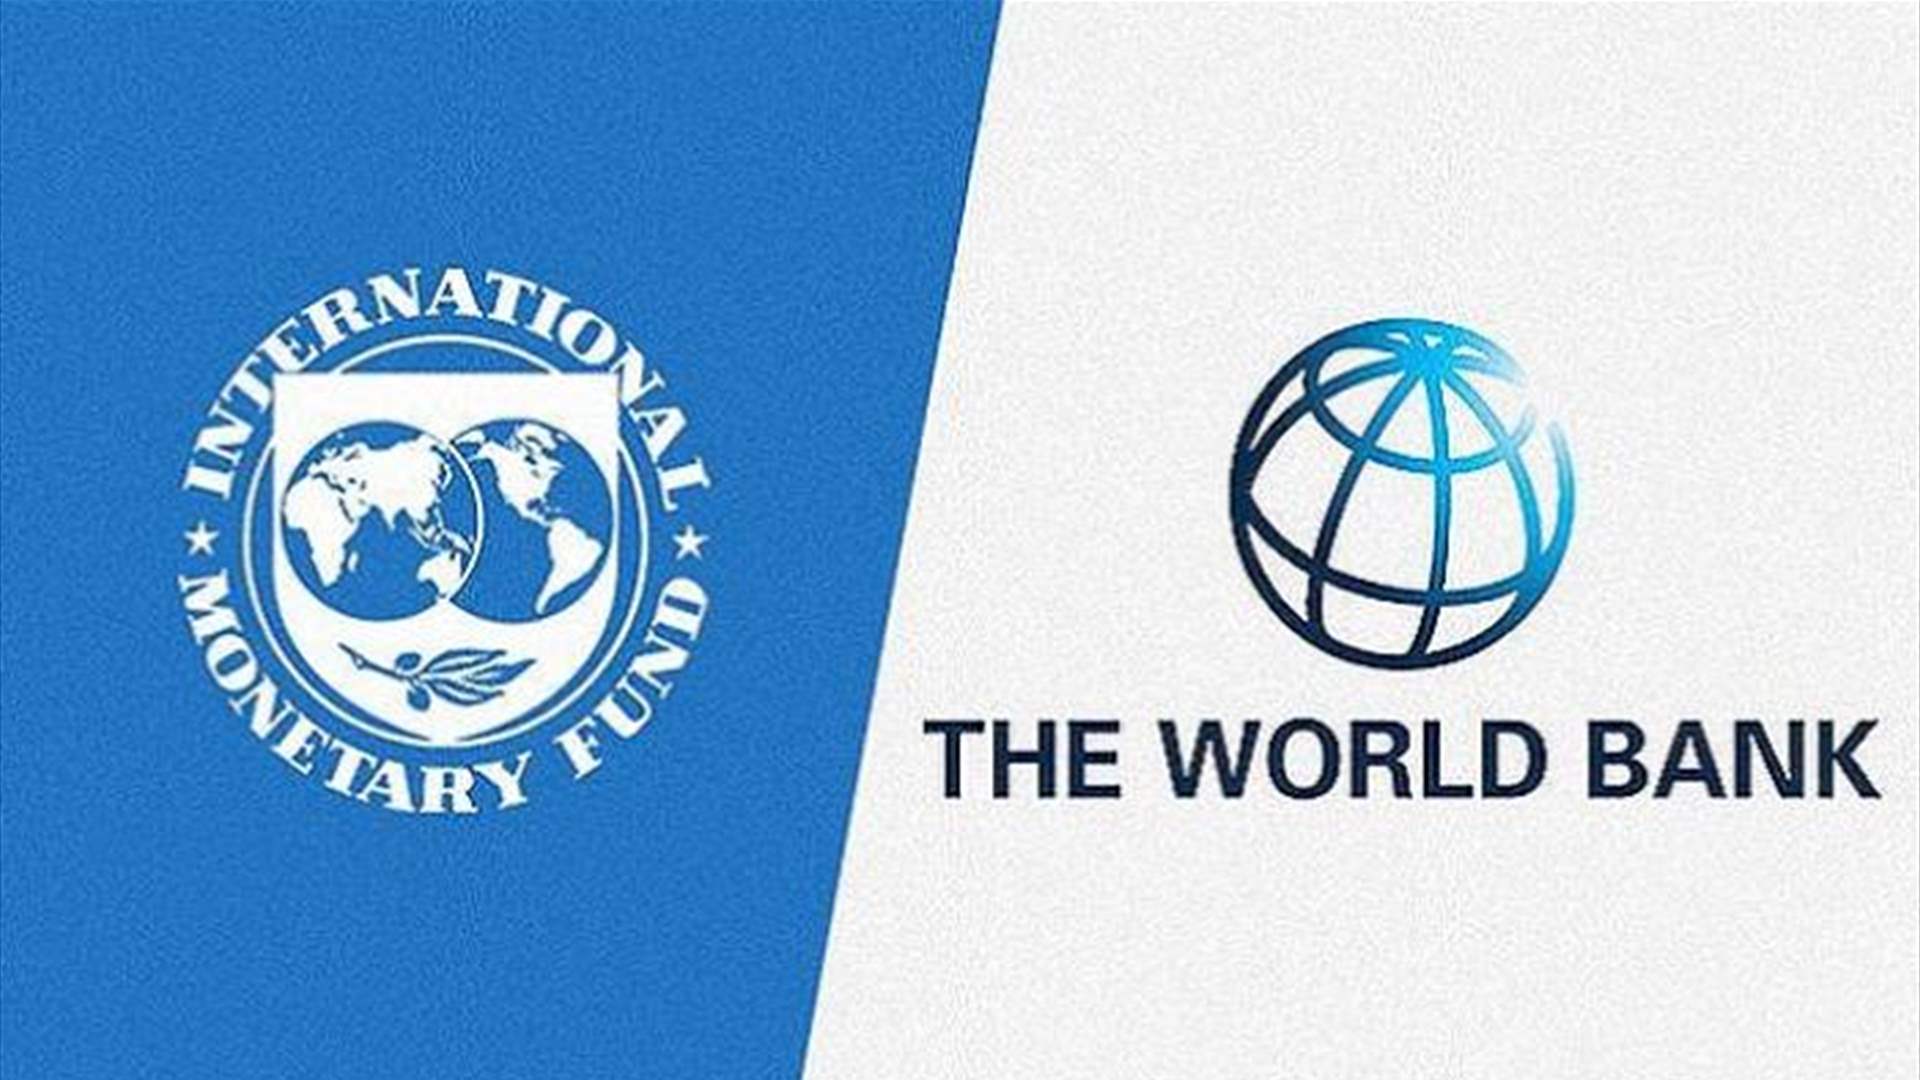 IMF, World Bank say meetings will be held in Morocco despite earthquake